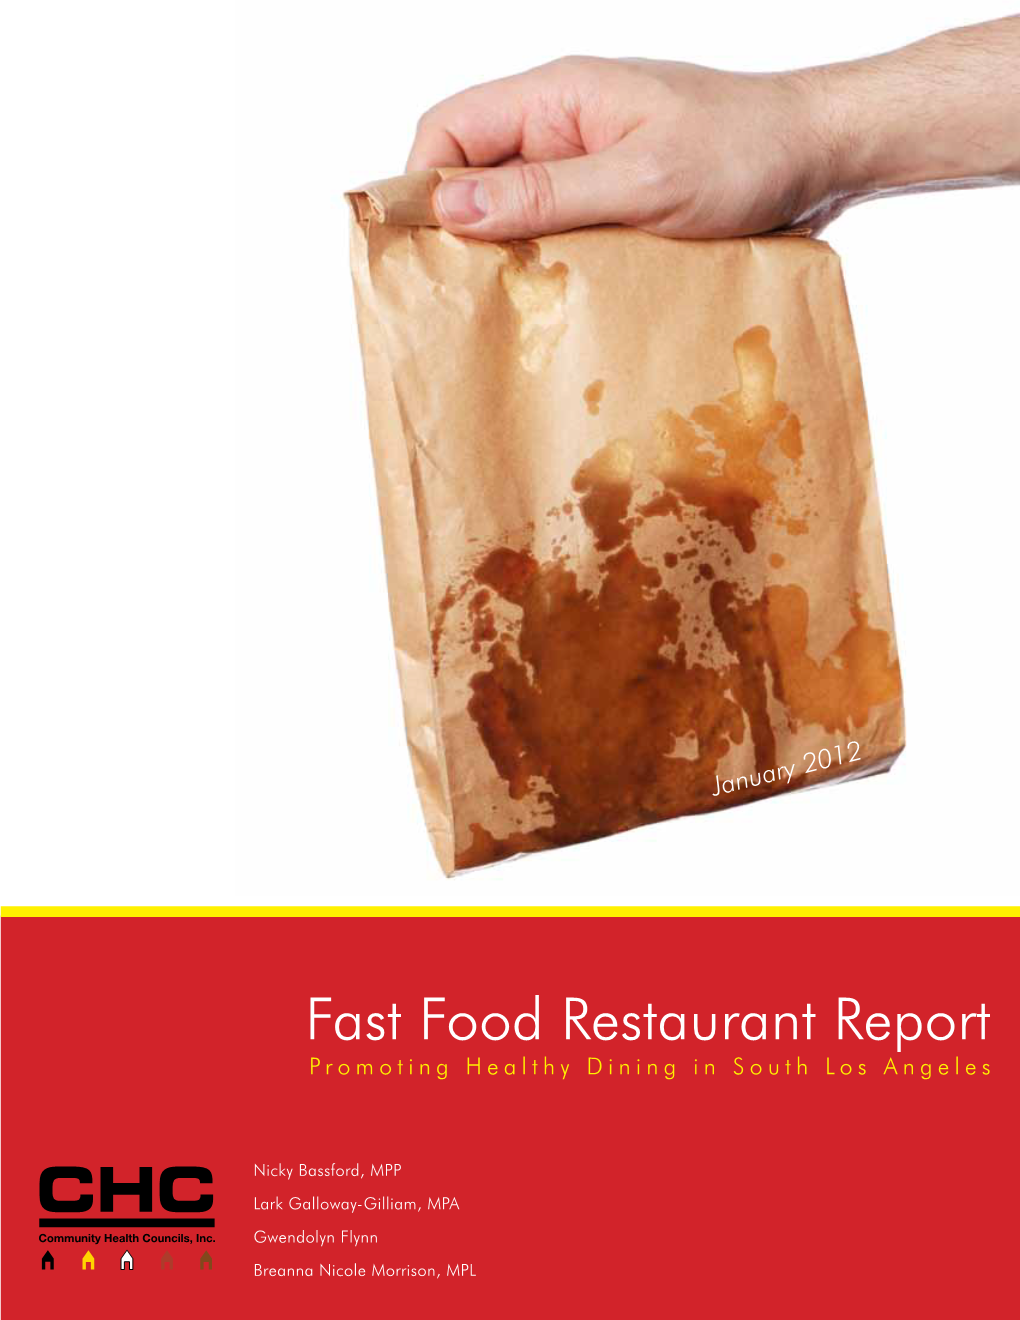 Fast Food Restaurant Report Promoting Healthy Dining in South Los Angeles